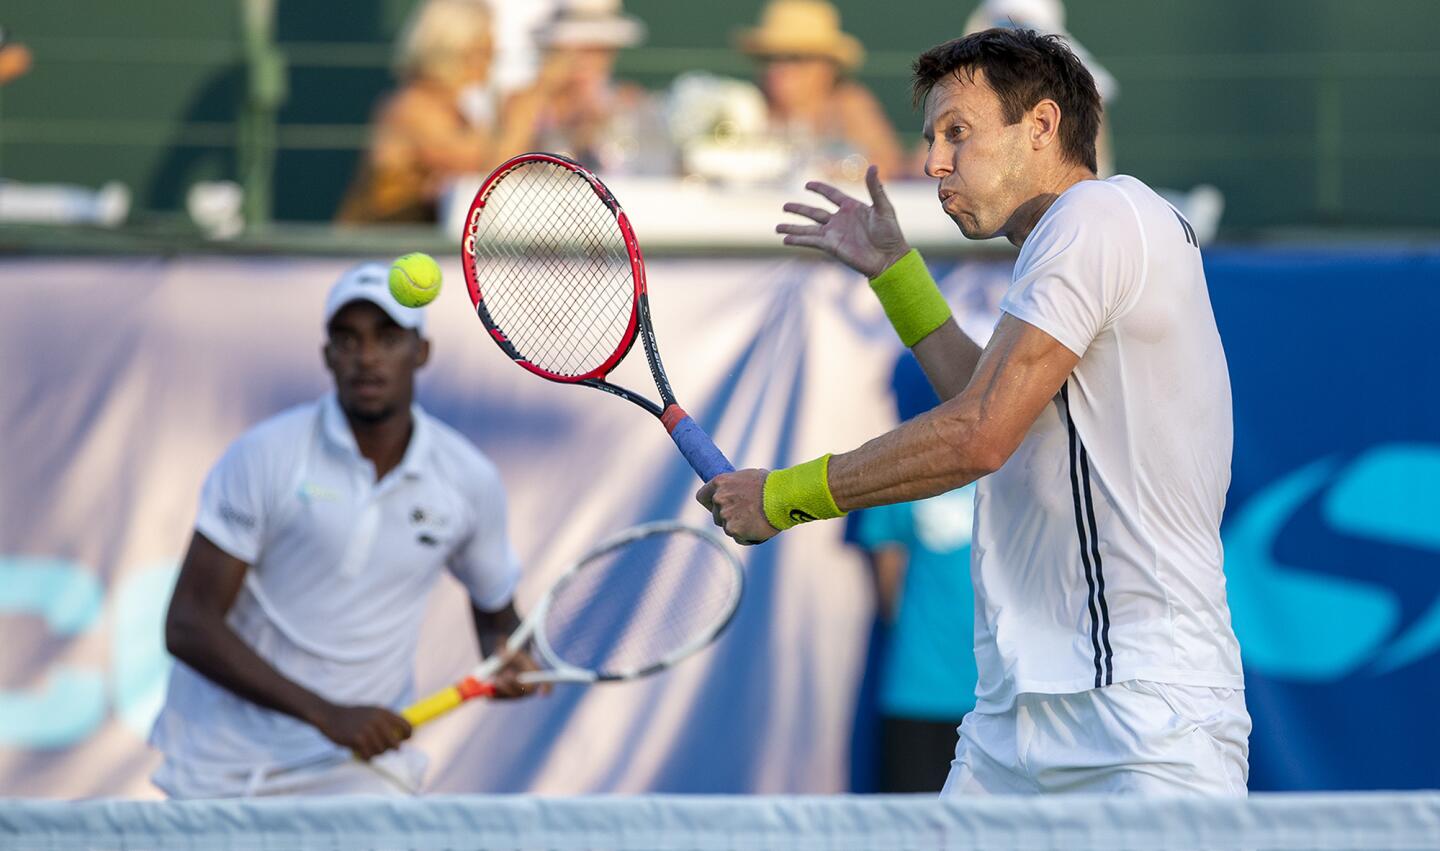 Orange County Breakers' Daniel Nestor returns a shot during a mens' doubles match against the Washington Kastles during a World Team Tennis match at the Palisades Tennis Club on Thursday, August 2.